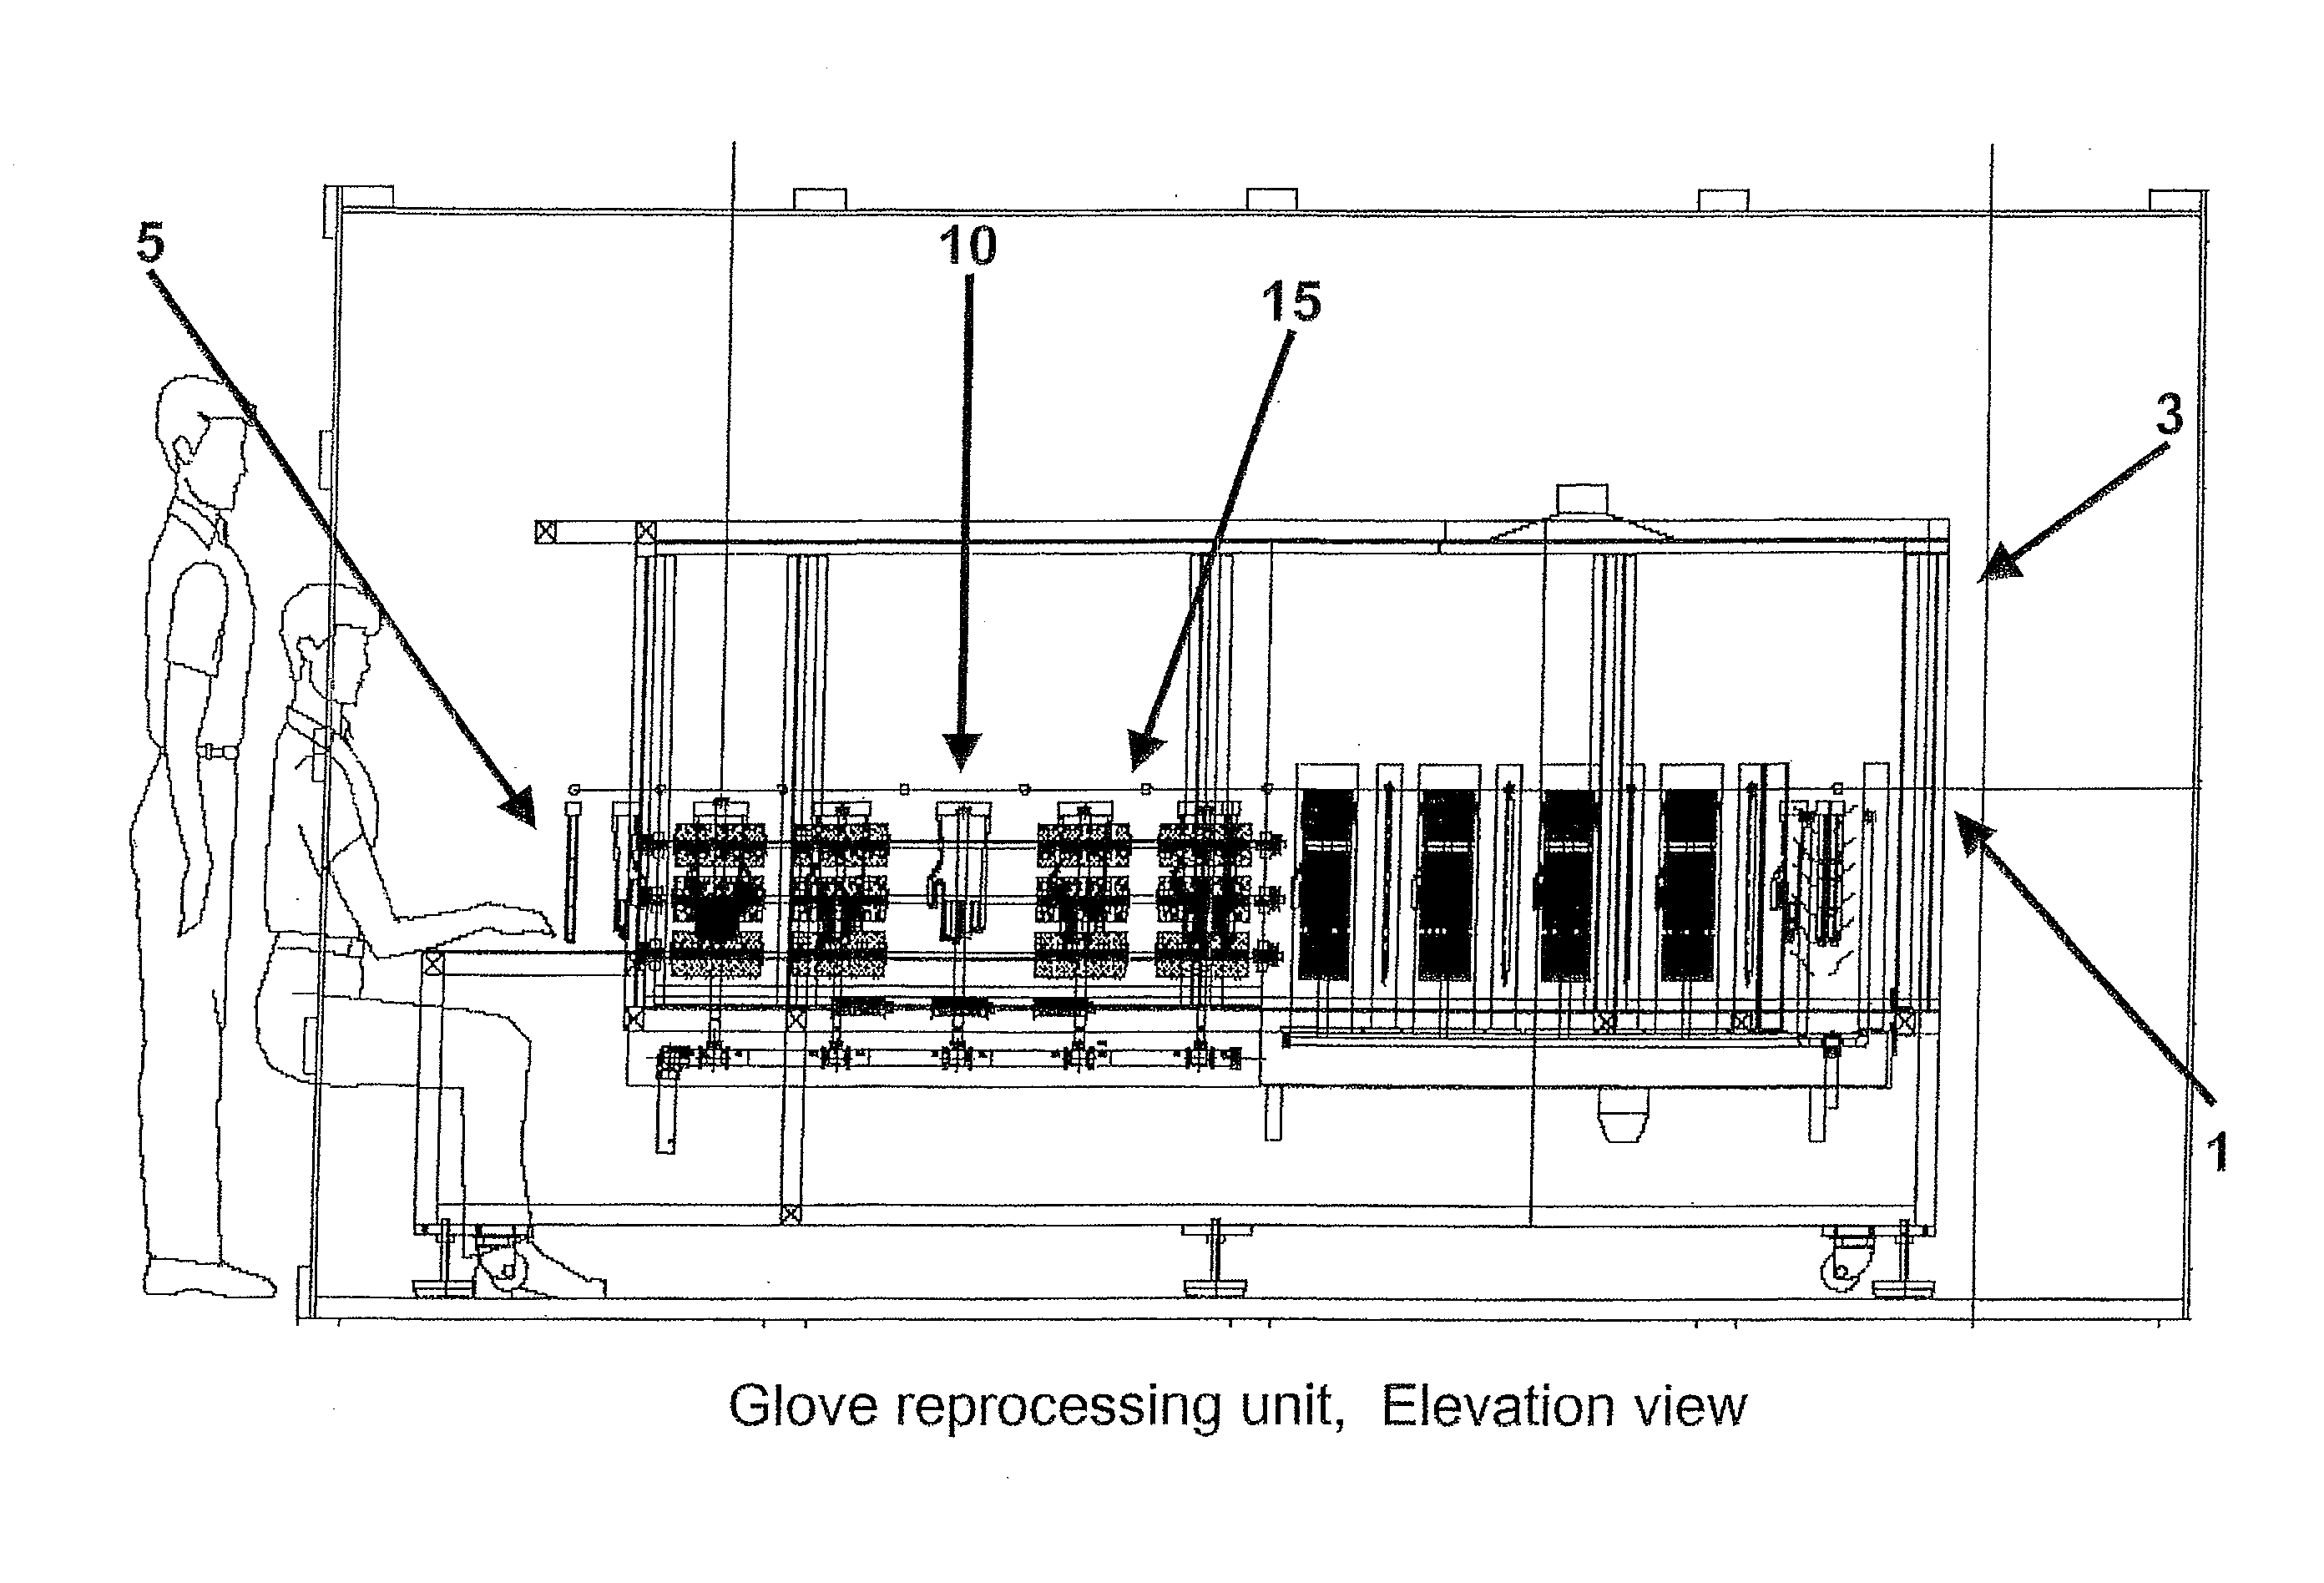 System for the processing of reusable gloves